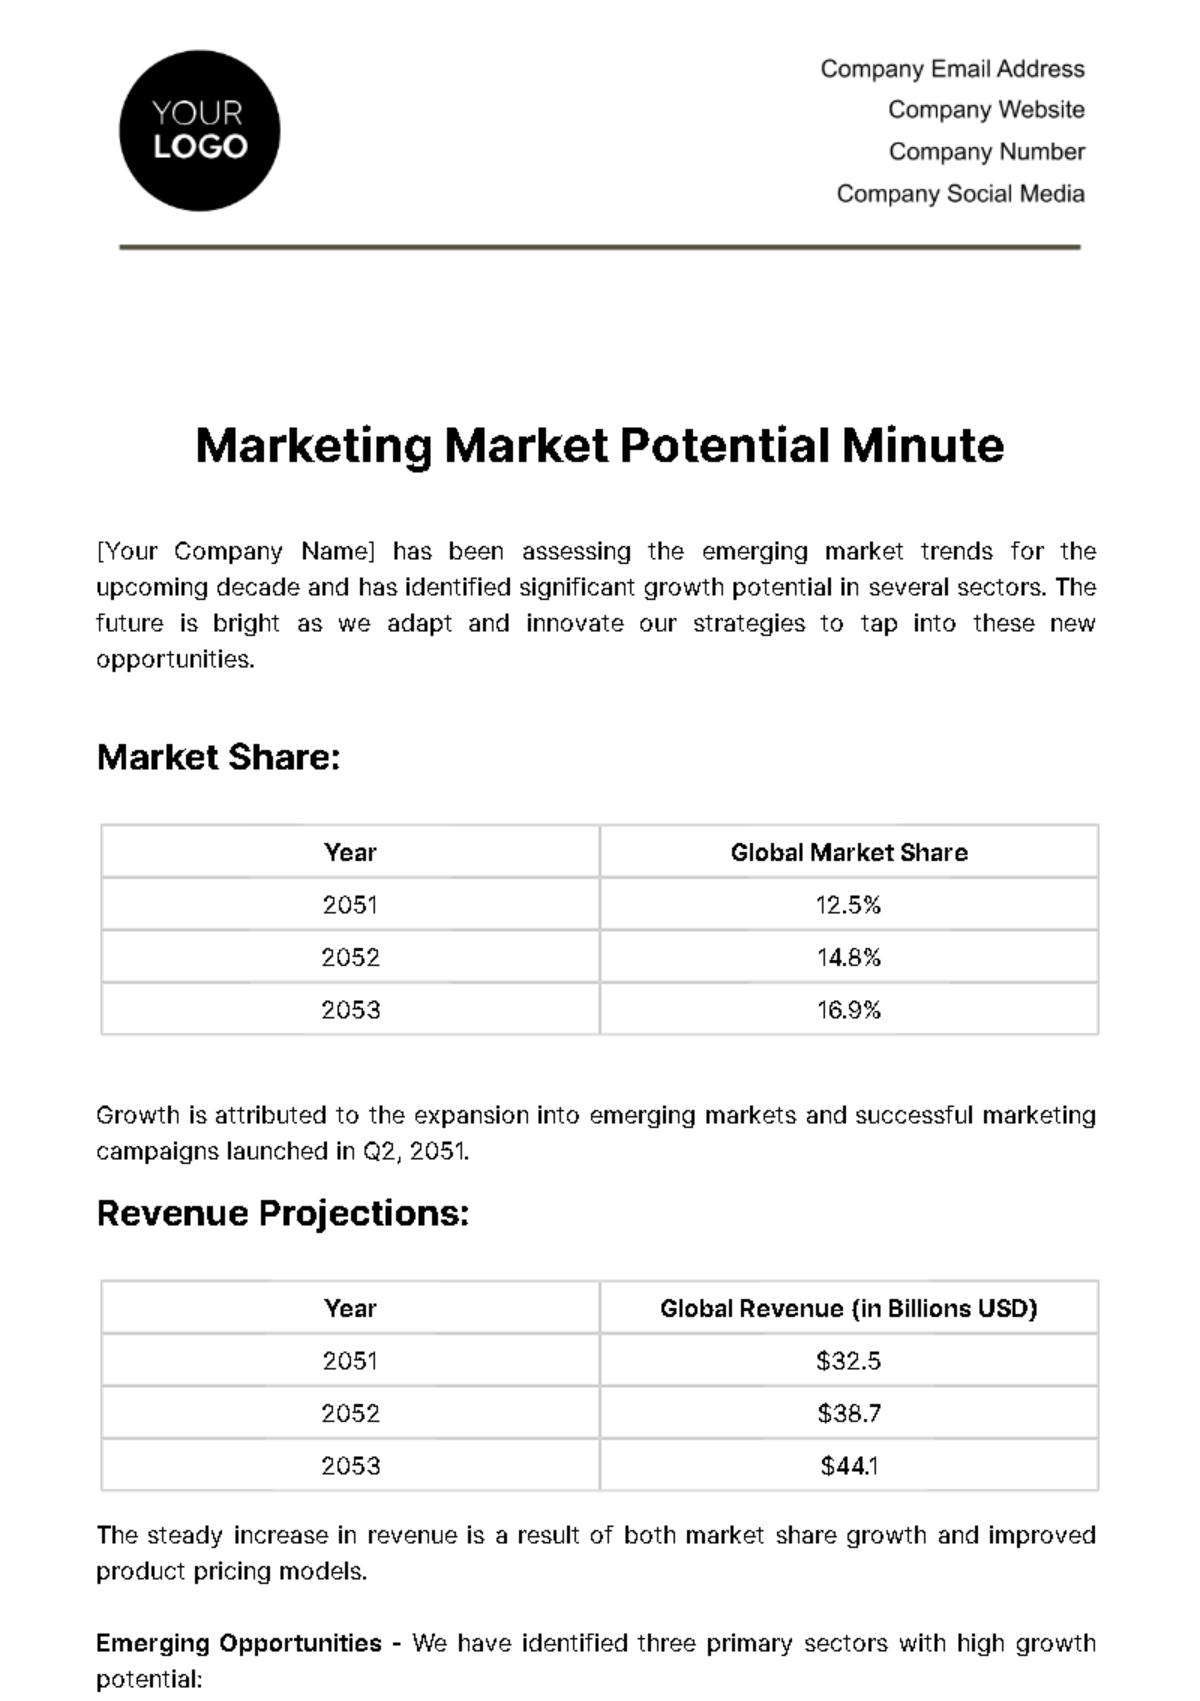 Free Marketing Market Potential Minute Template